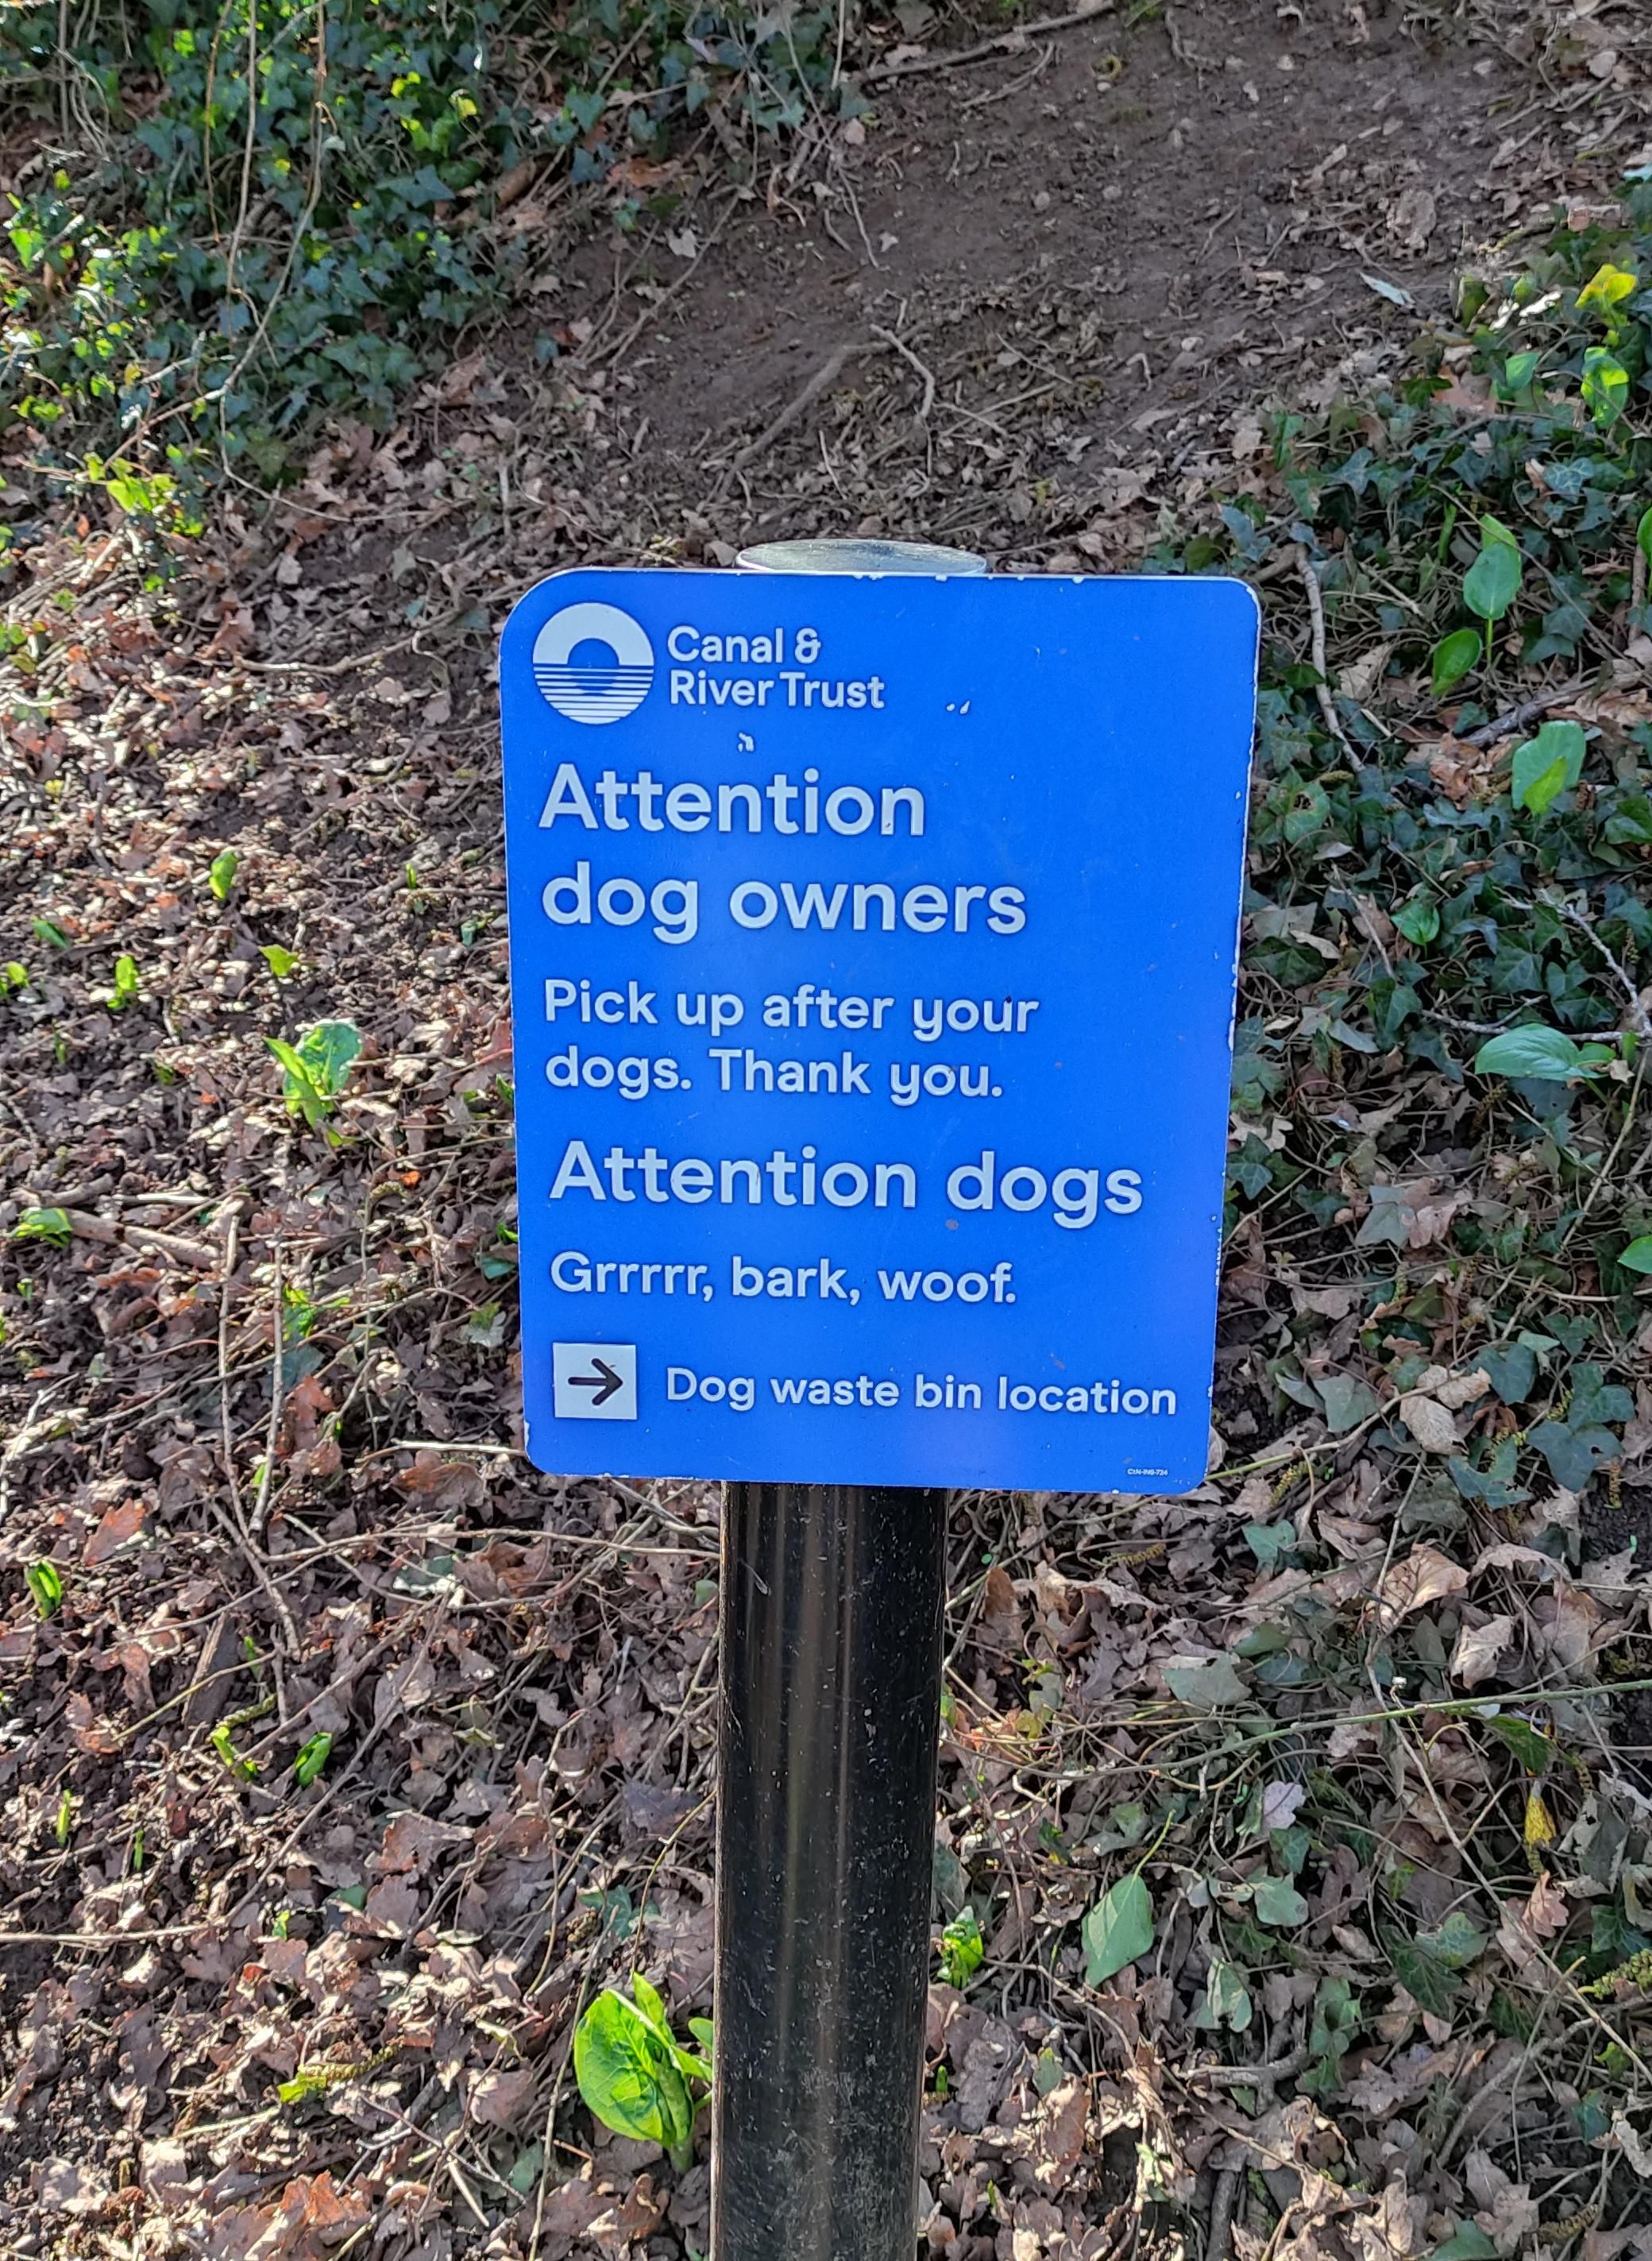 This post is for dogs only